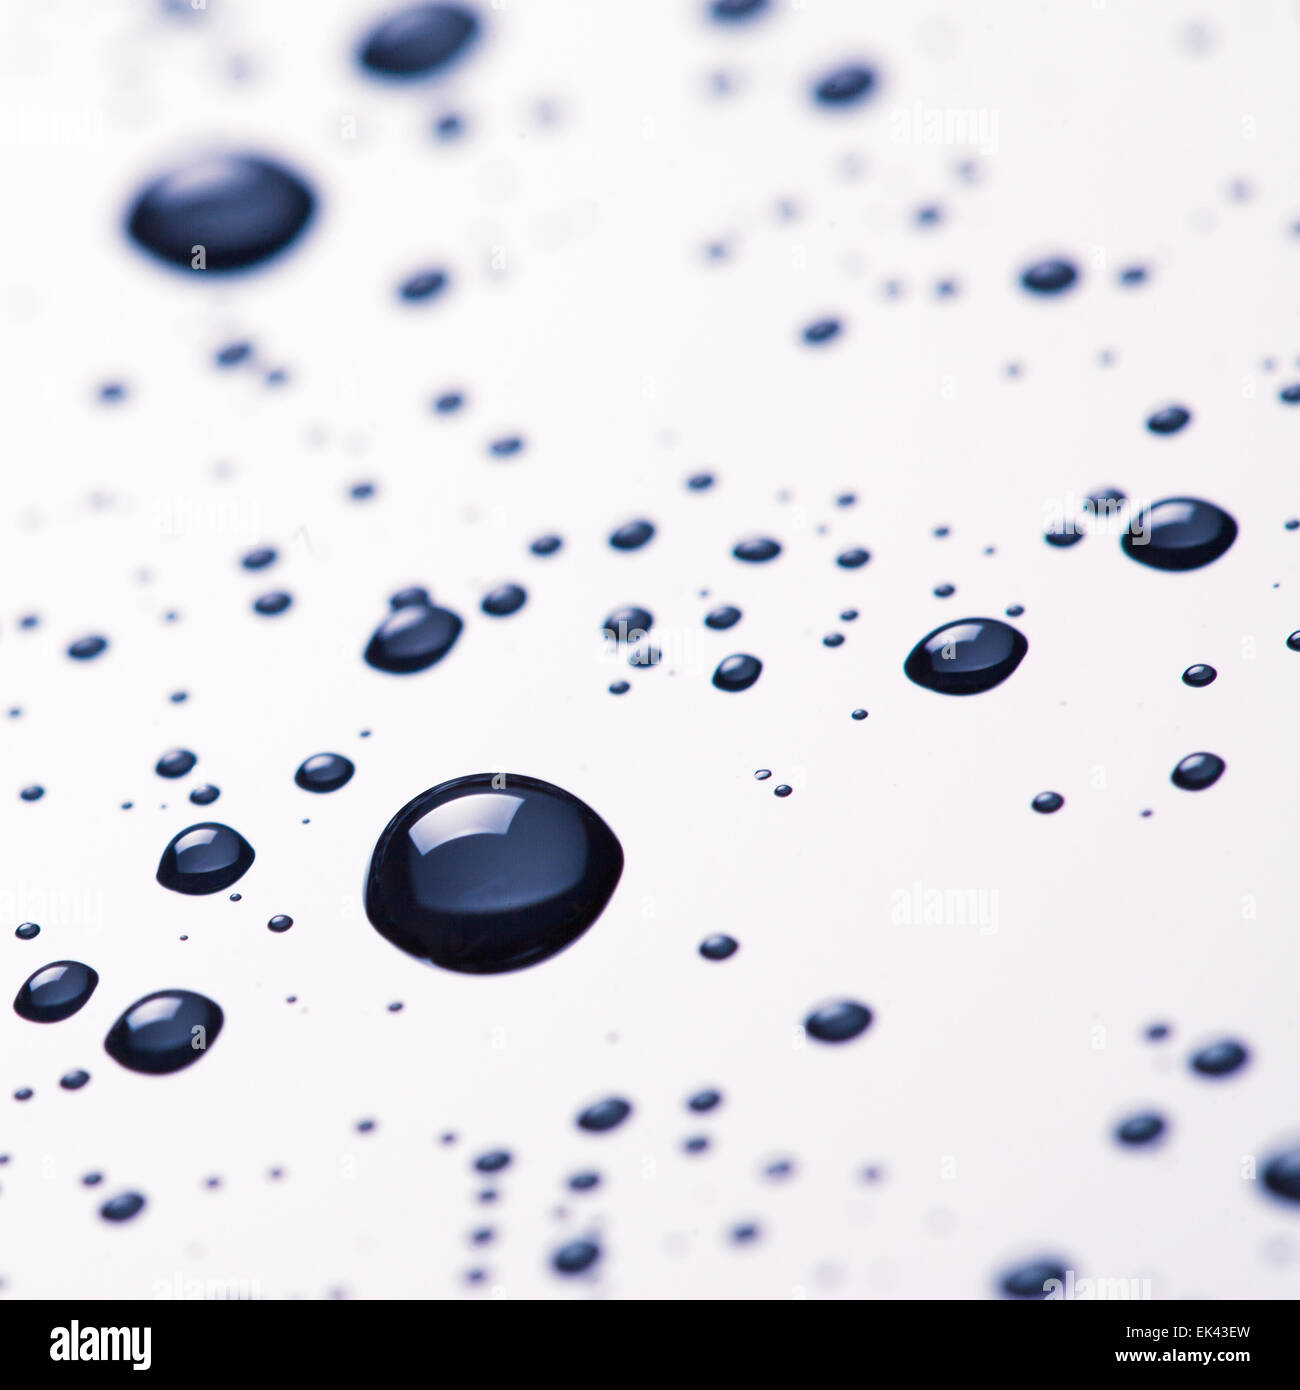 Water drop and droplet Stock Photo